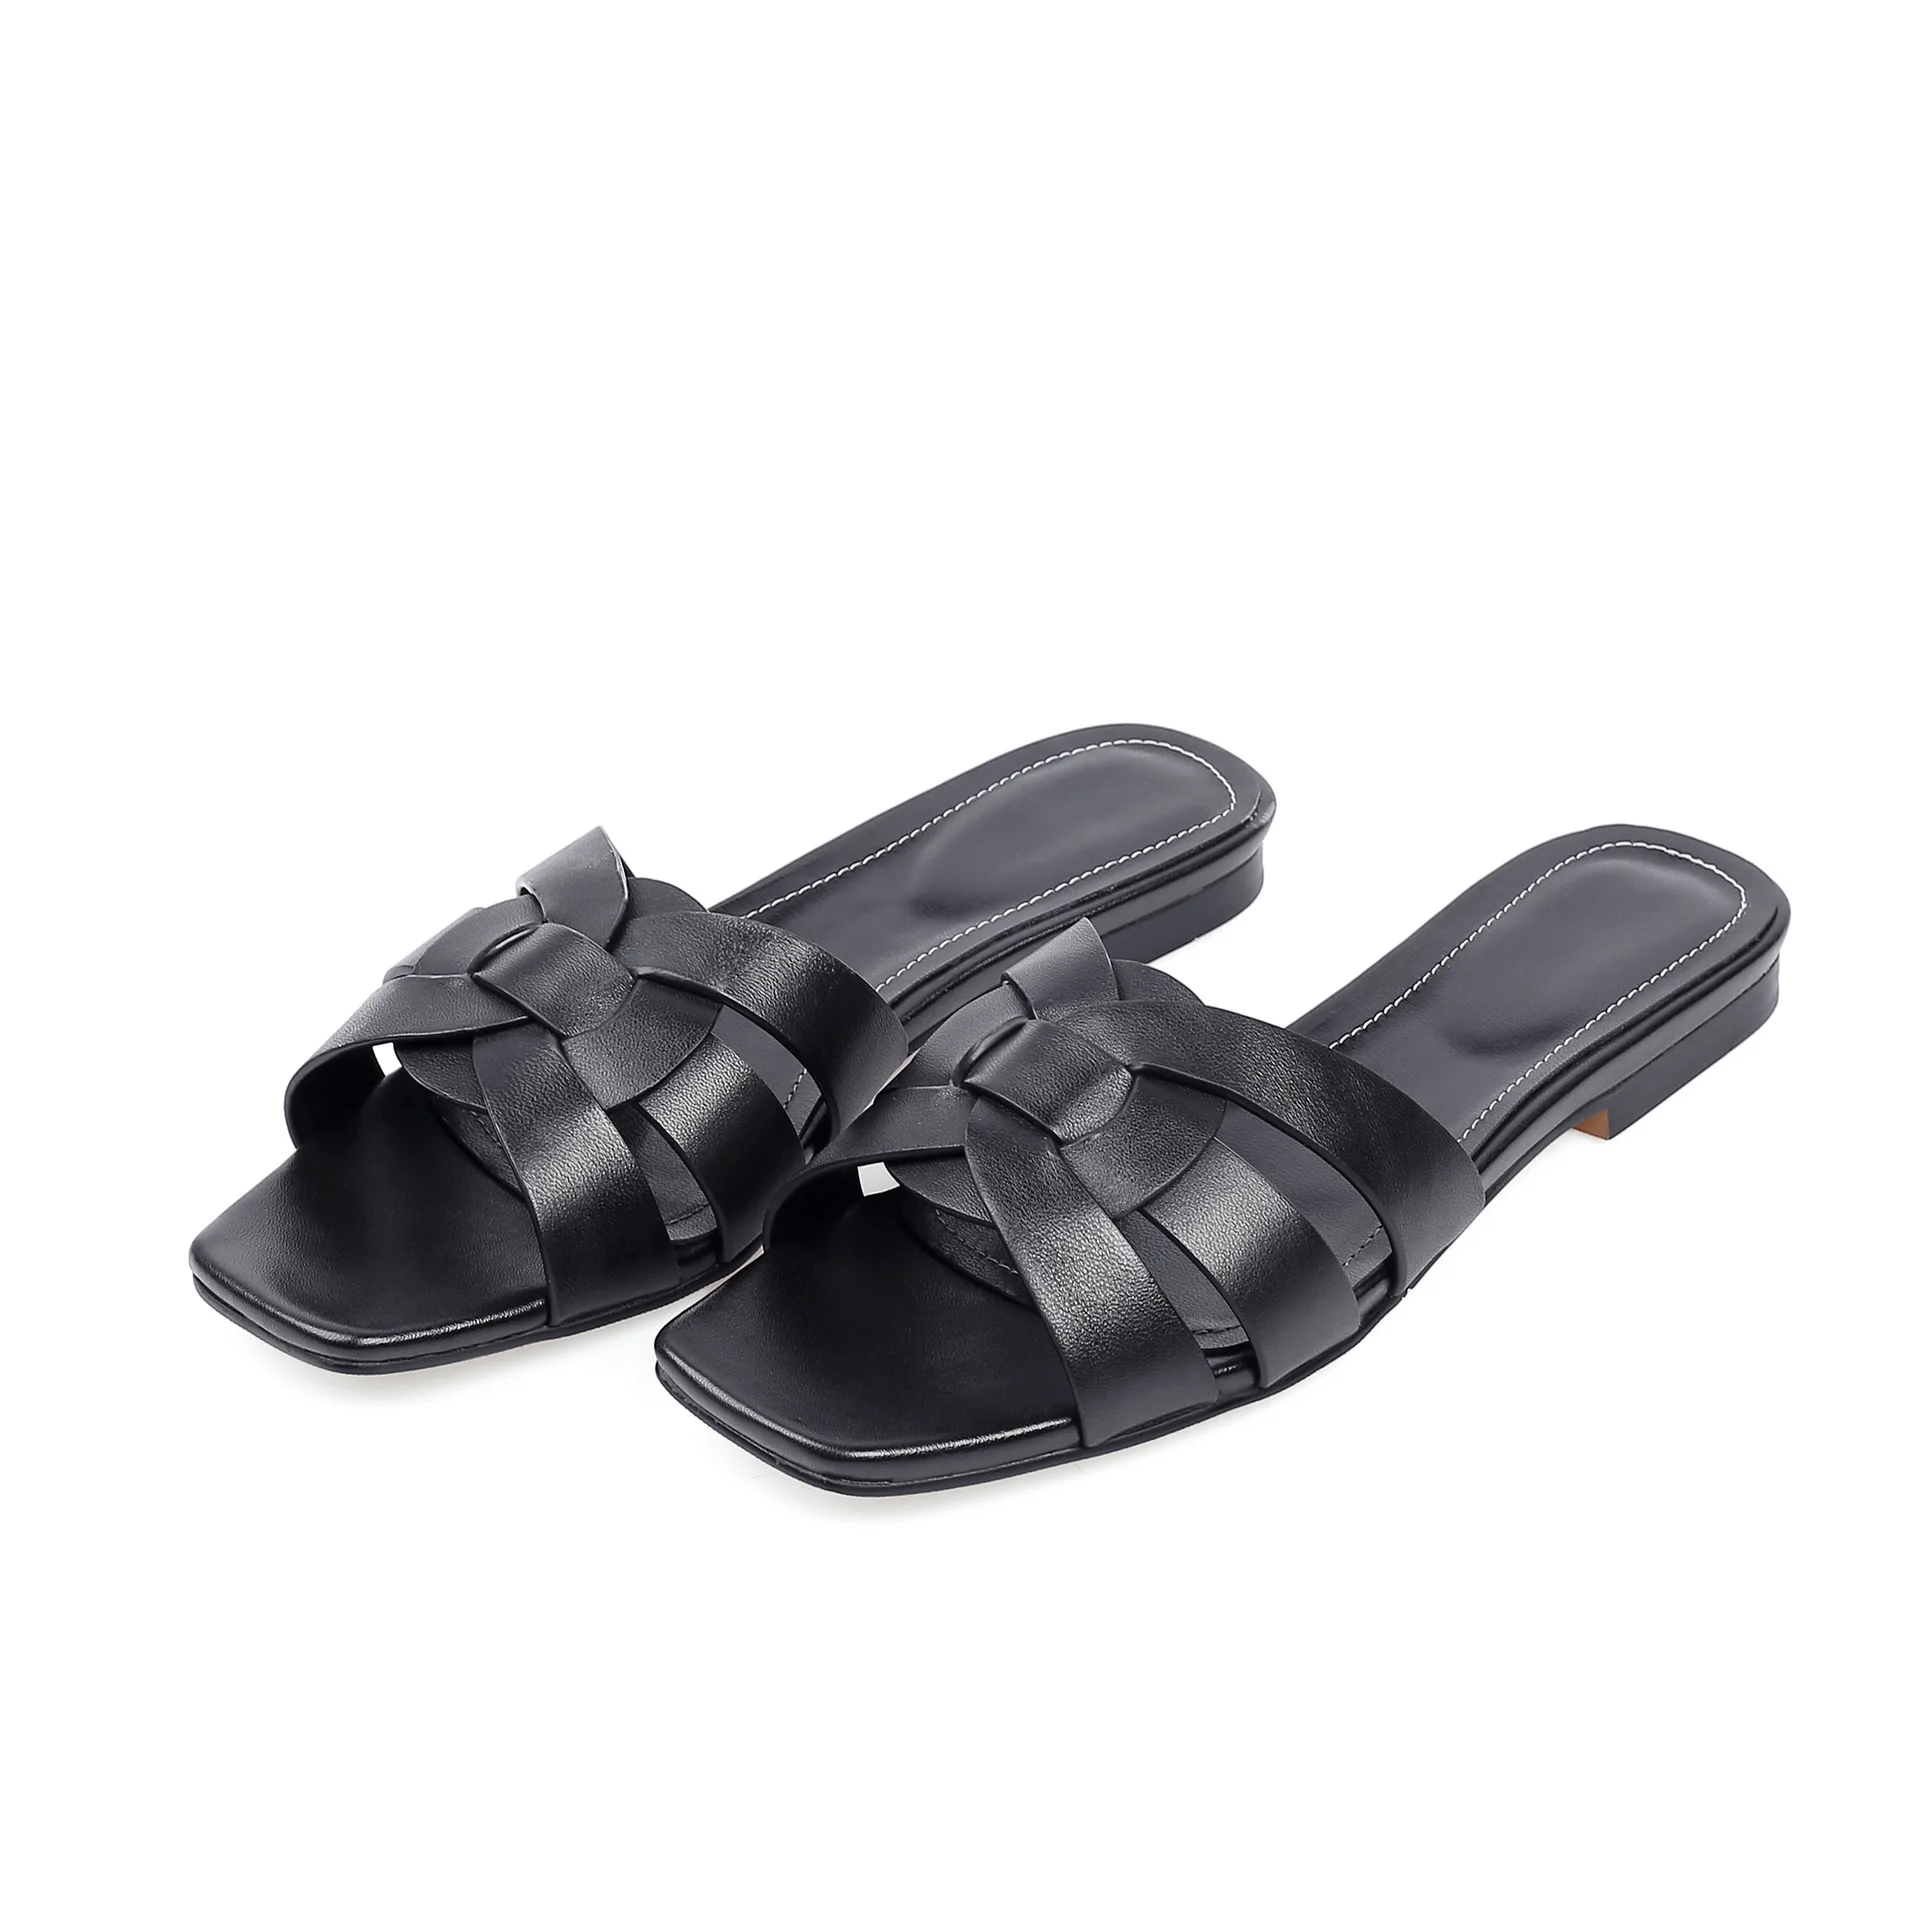 

Patent Leather Women Flat Sandals Intertwining Straps Summer Beach Slippers Slides Lady Casual Mules Shoes Flip Flops